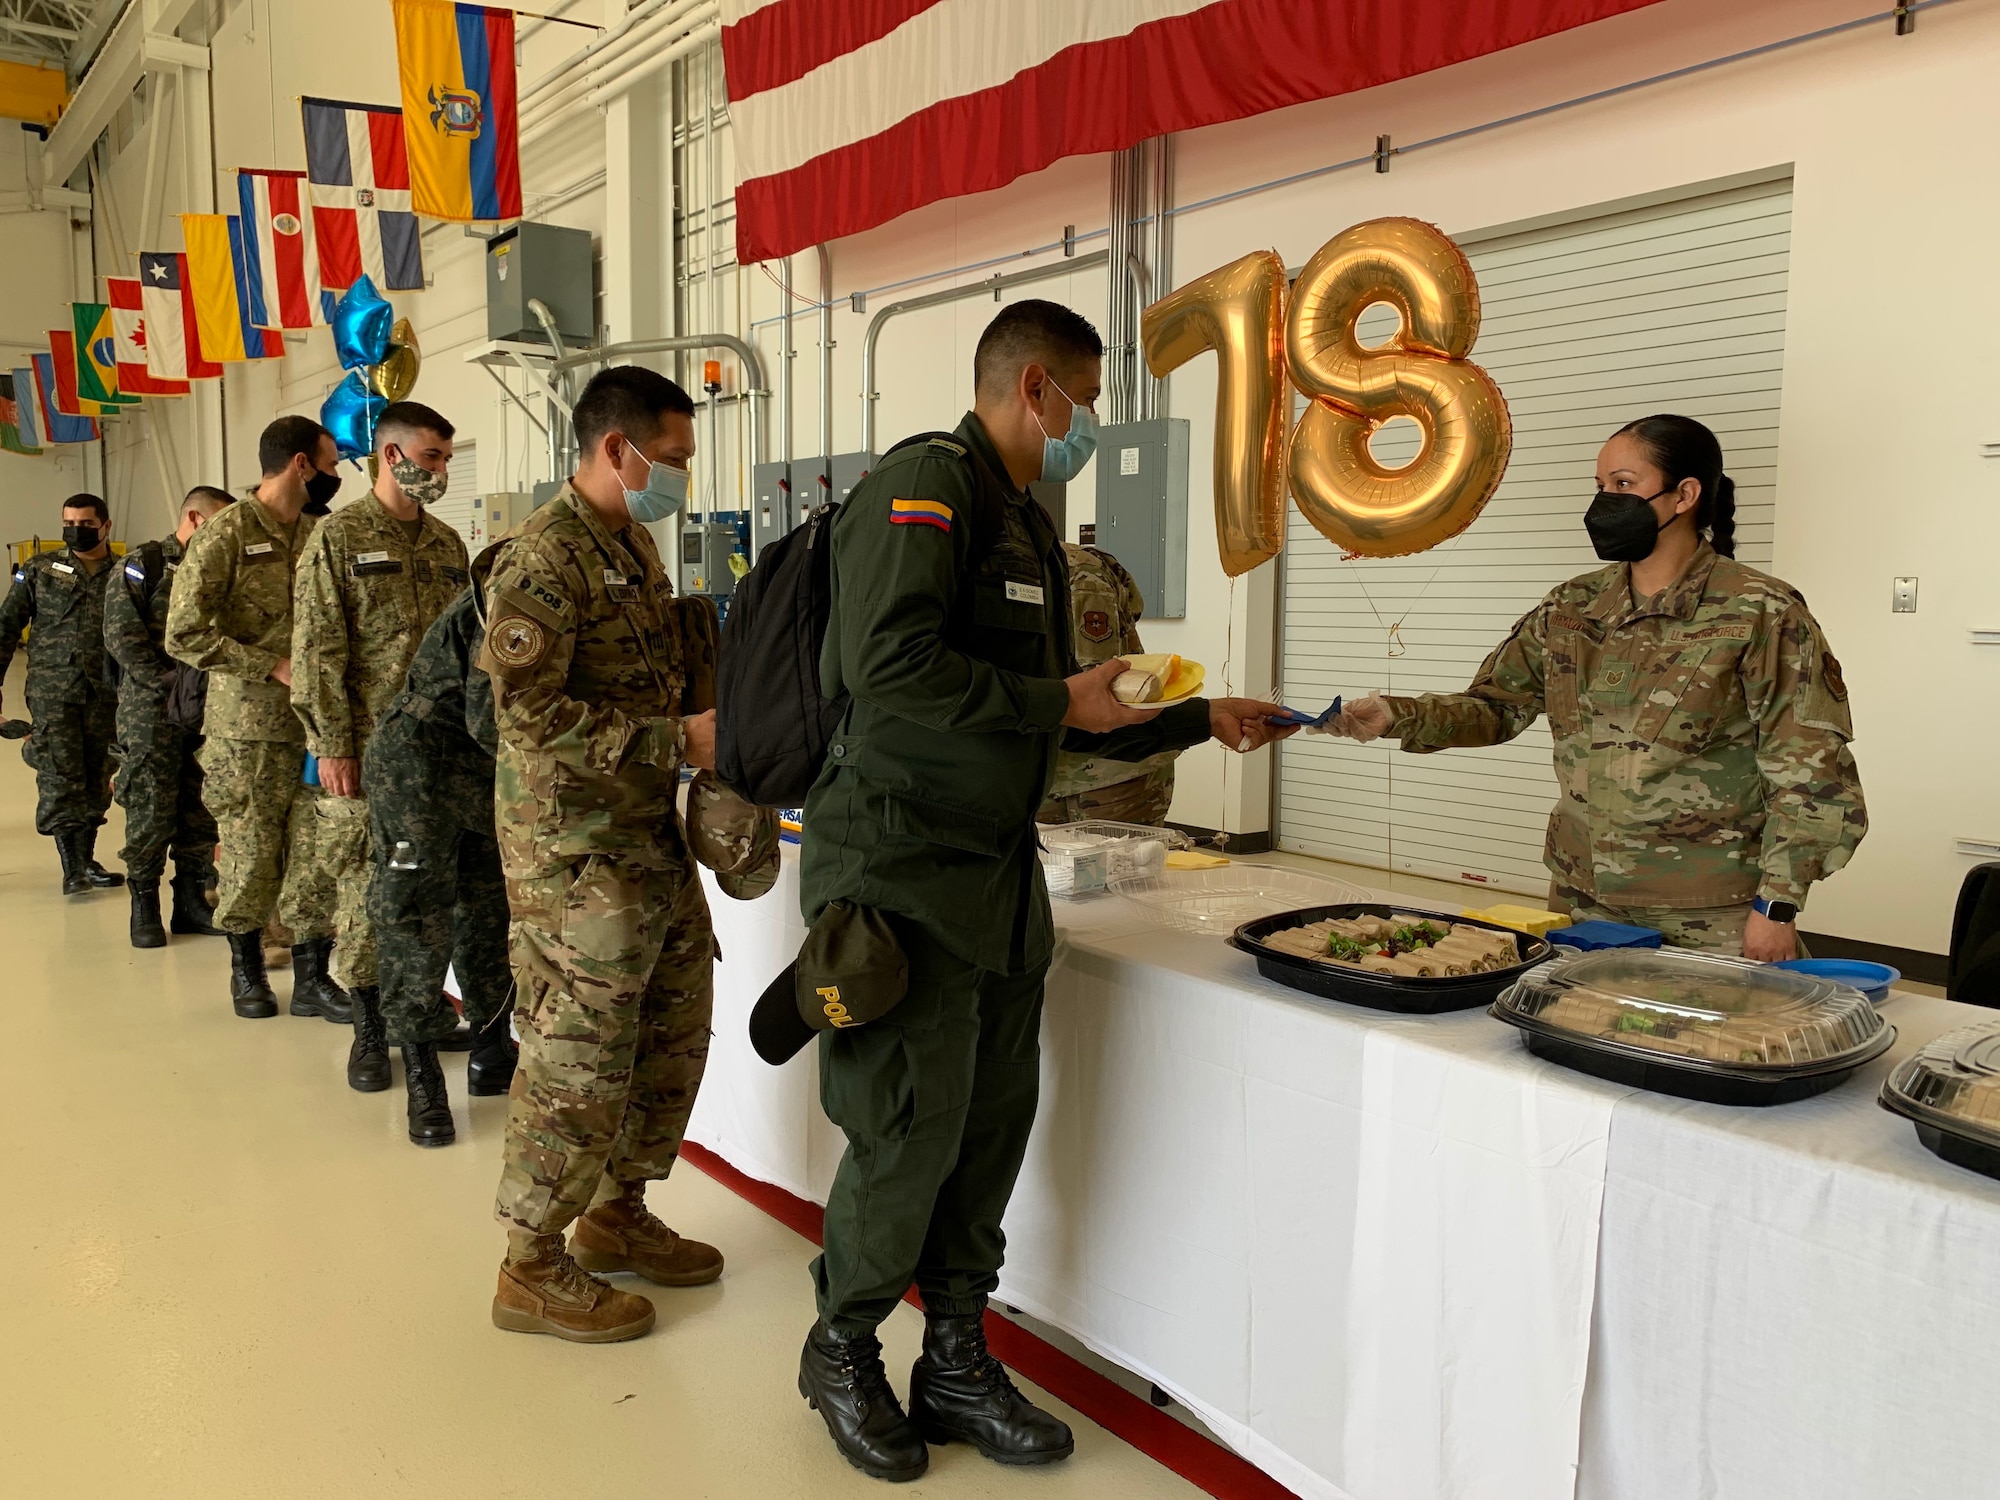 The Inter-American Air Forces Academy celebrated its 78th birthday in a small ceremony with top leaders at Joint Base San Antonio-Lackland, Texas, March 15, 2021.